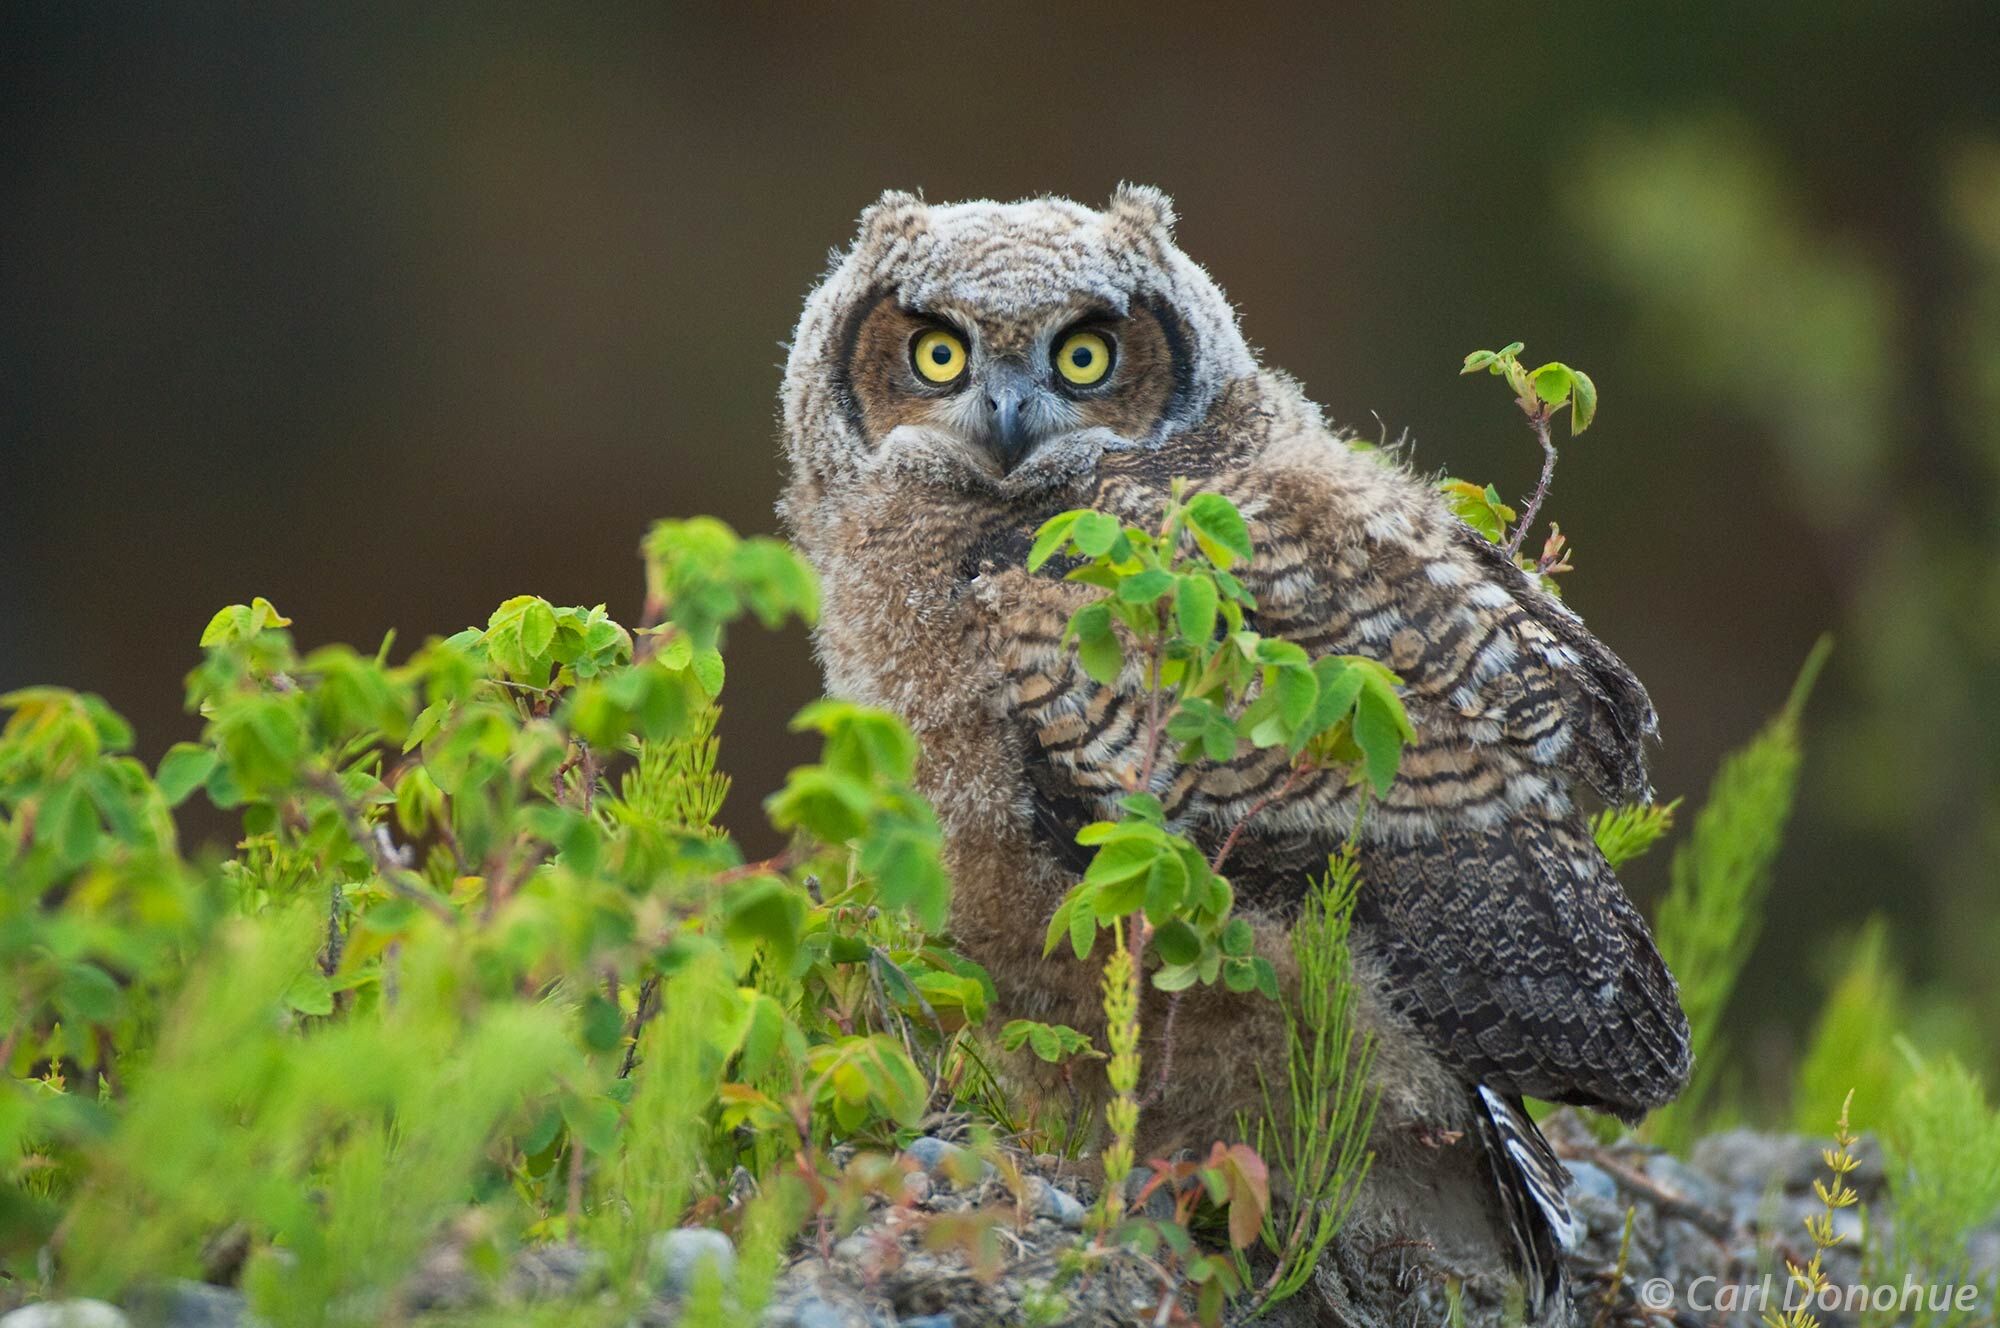 The Great Horned Owl is a symbol of the rugged beauty and natural diversity found in Wrangell-St. Elias National Park. The piercing...